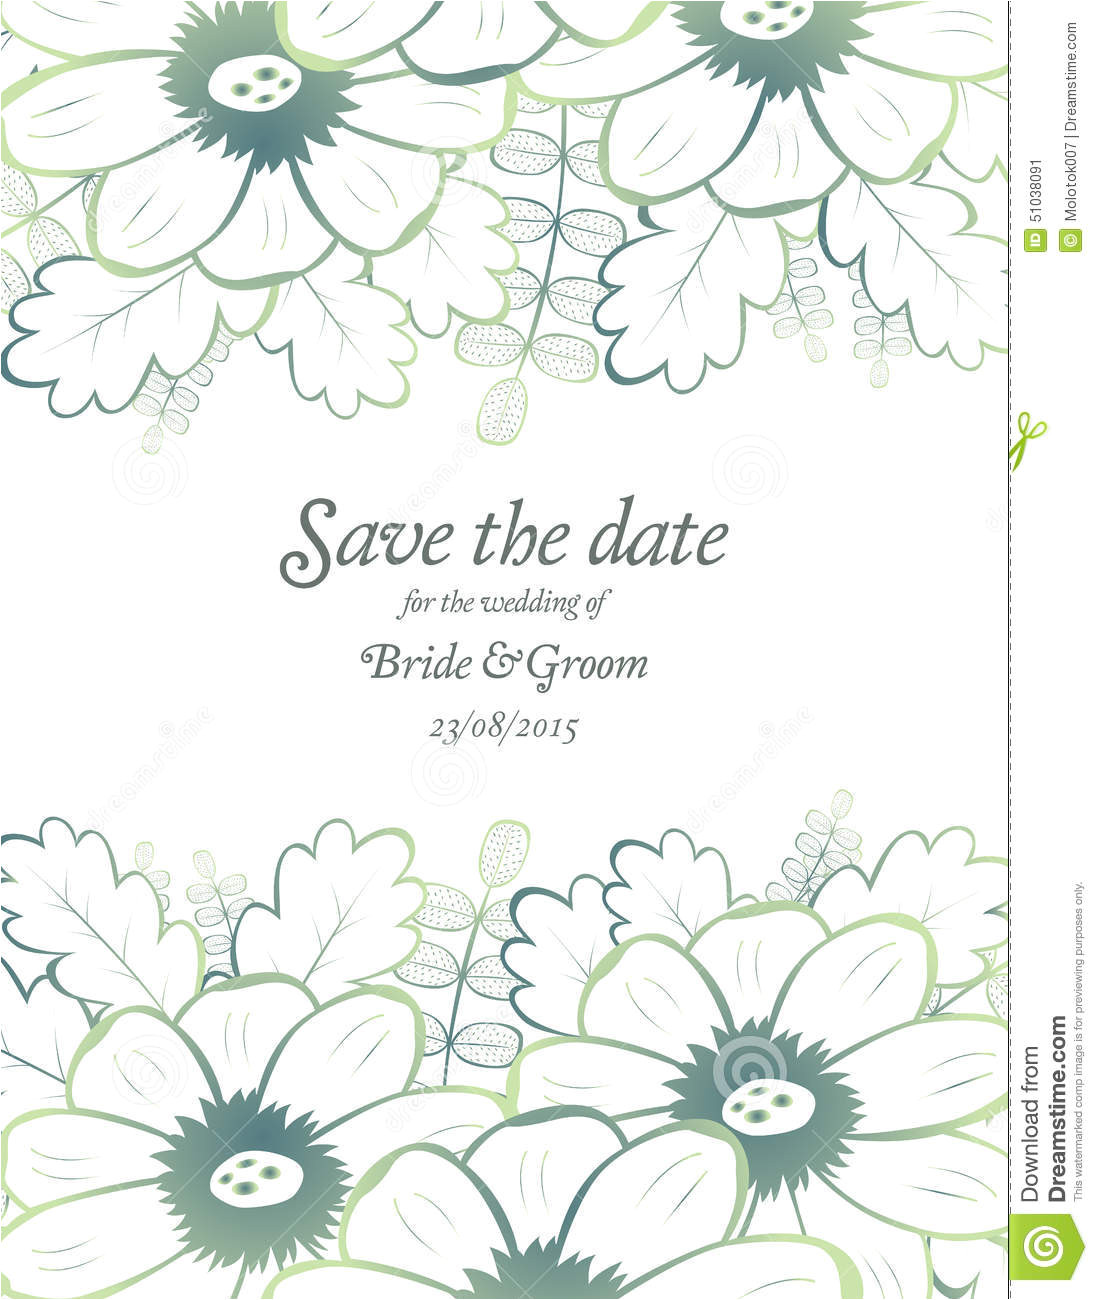 stock illustration save date wedding invite card template green flowers vector illustration image51038091